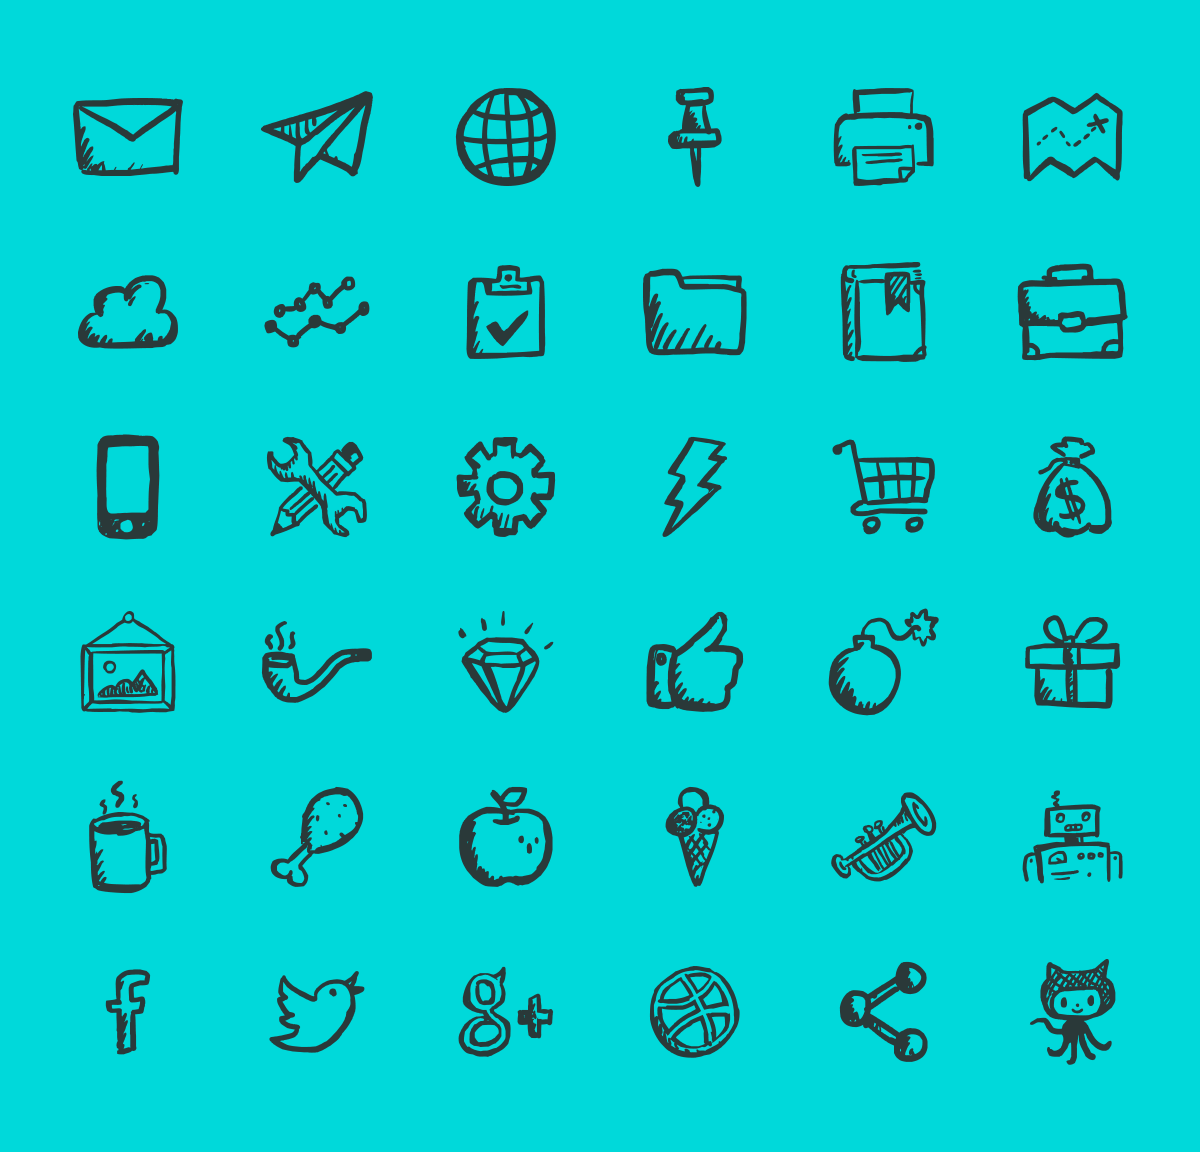 jolly-icons-free-by-hatchers